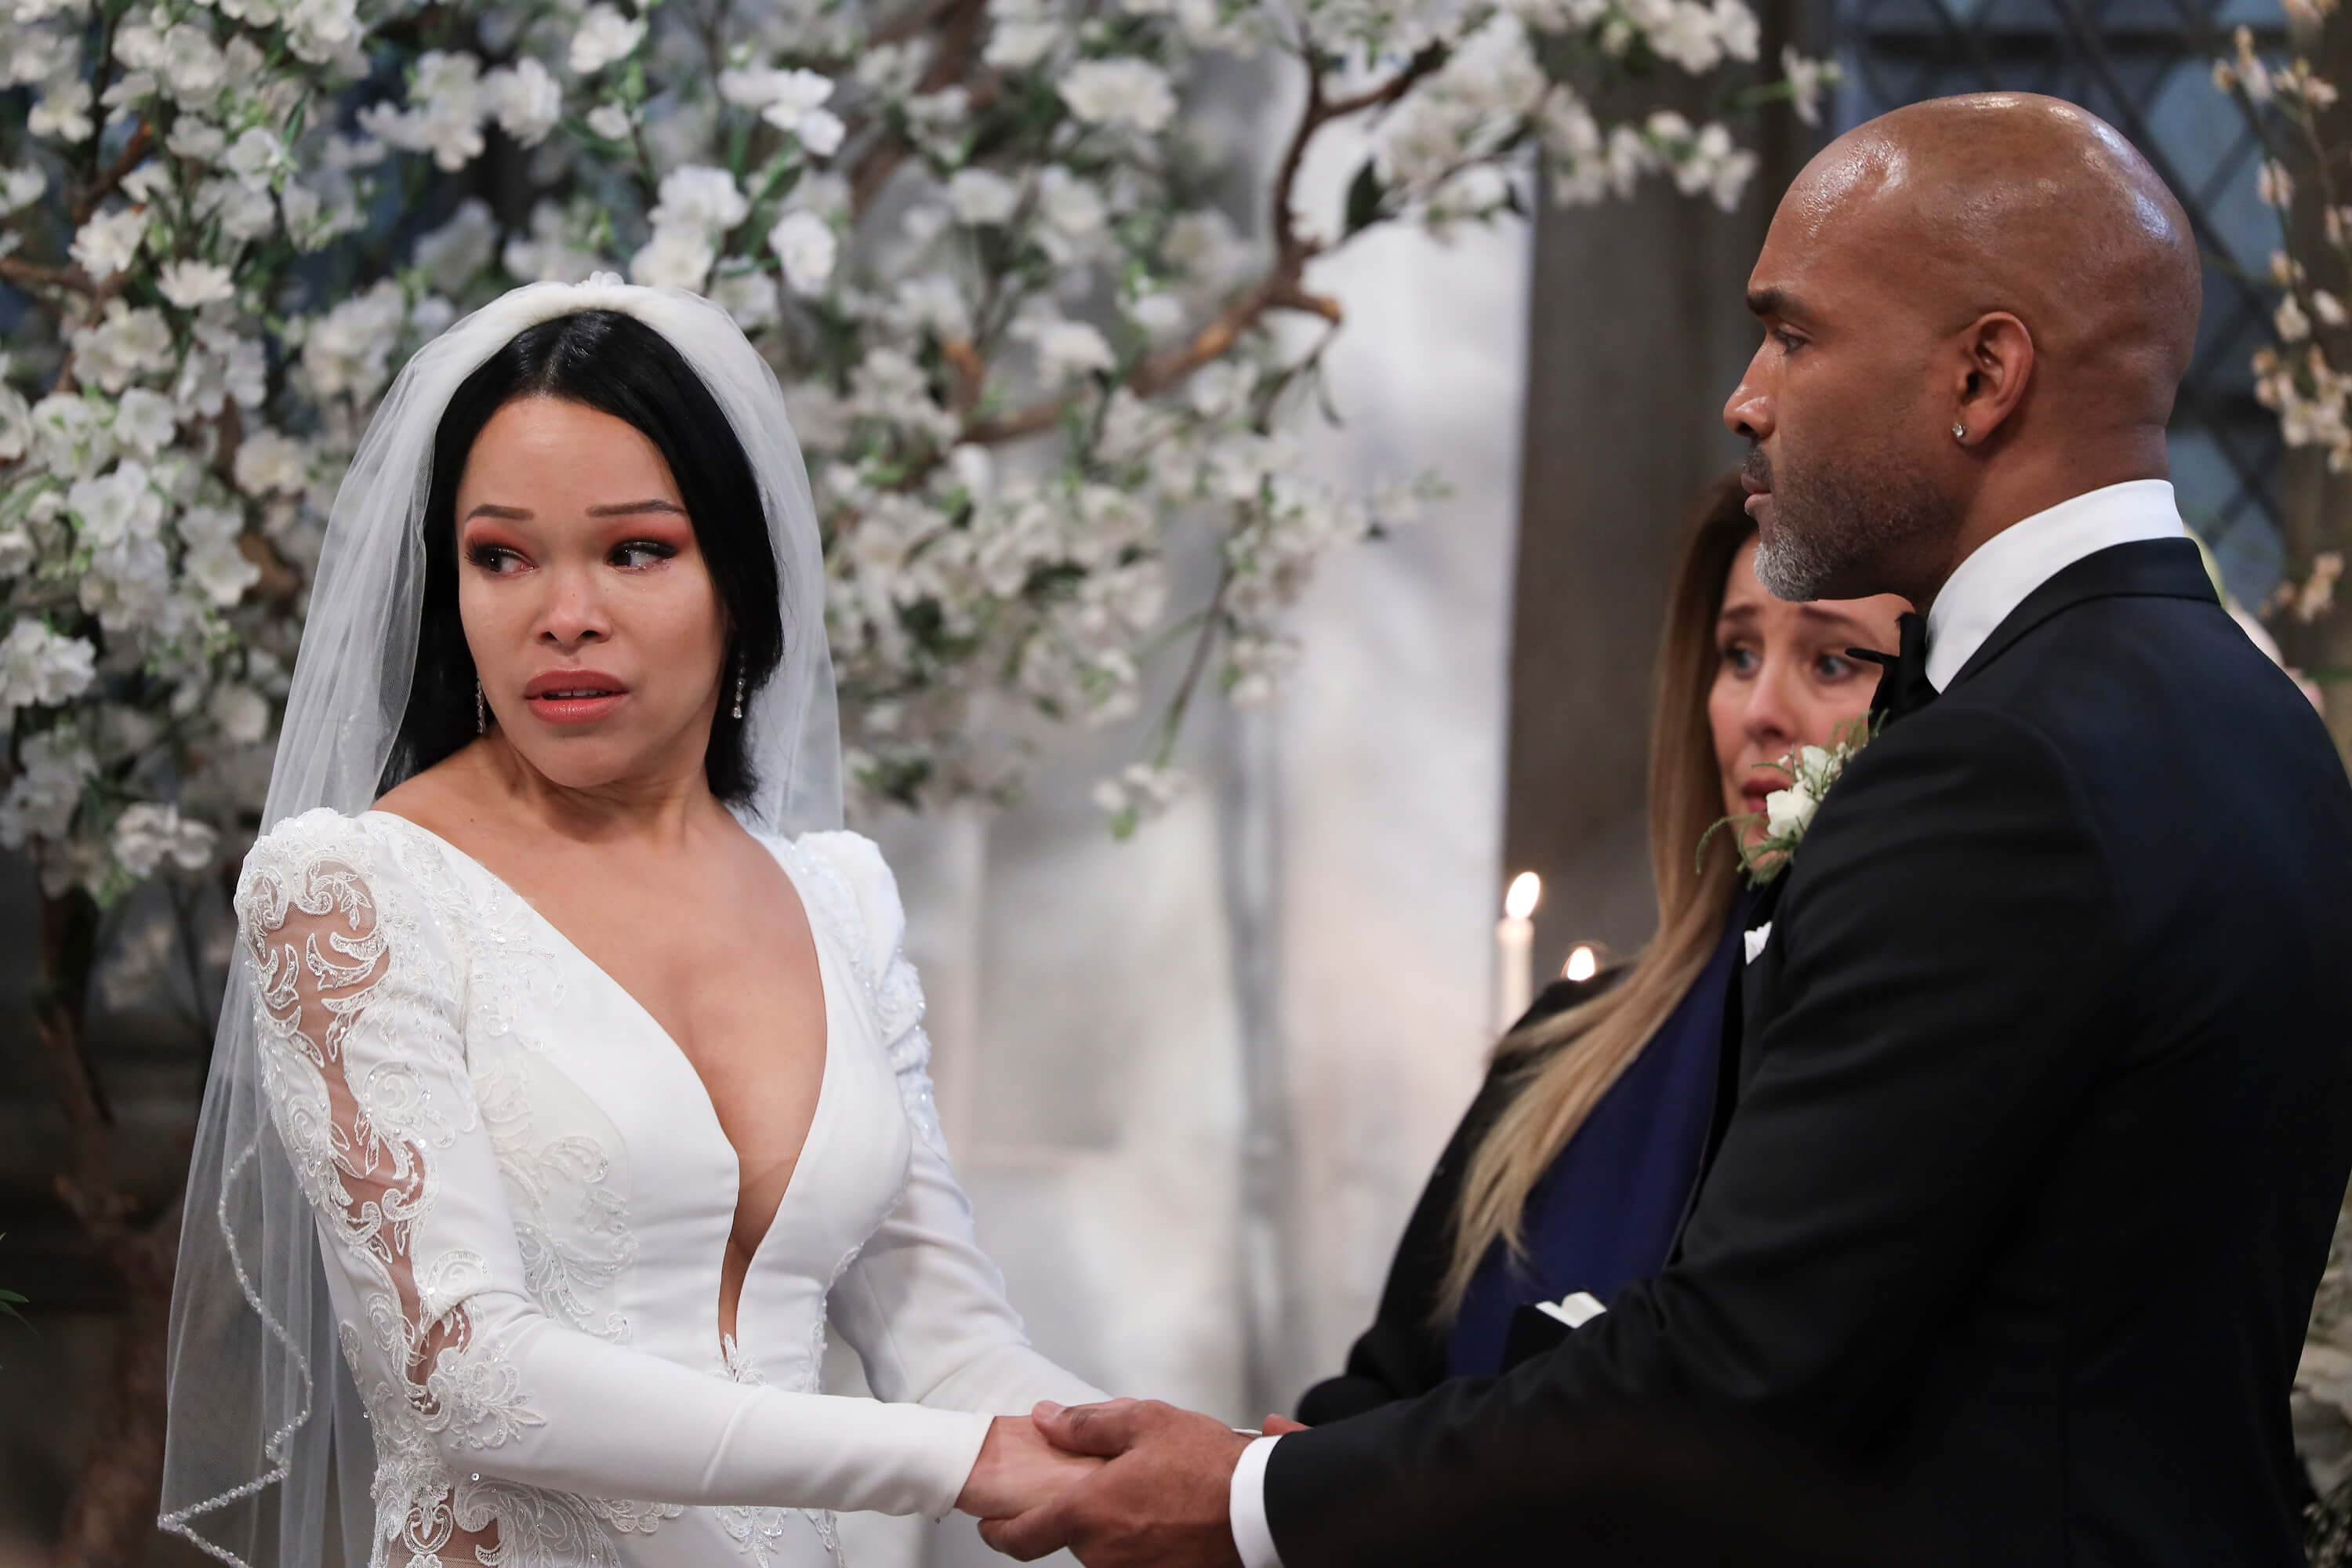 'General Hospital' stars Brook Kerr and Donnell Turner in a scene from Portia Robinson and Curtis Ashford's wedding.